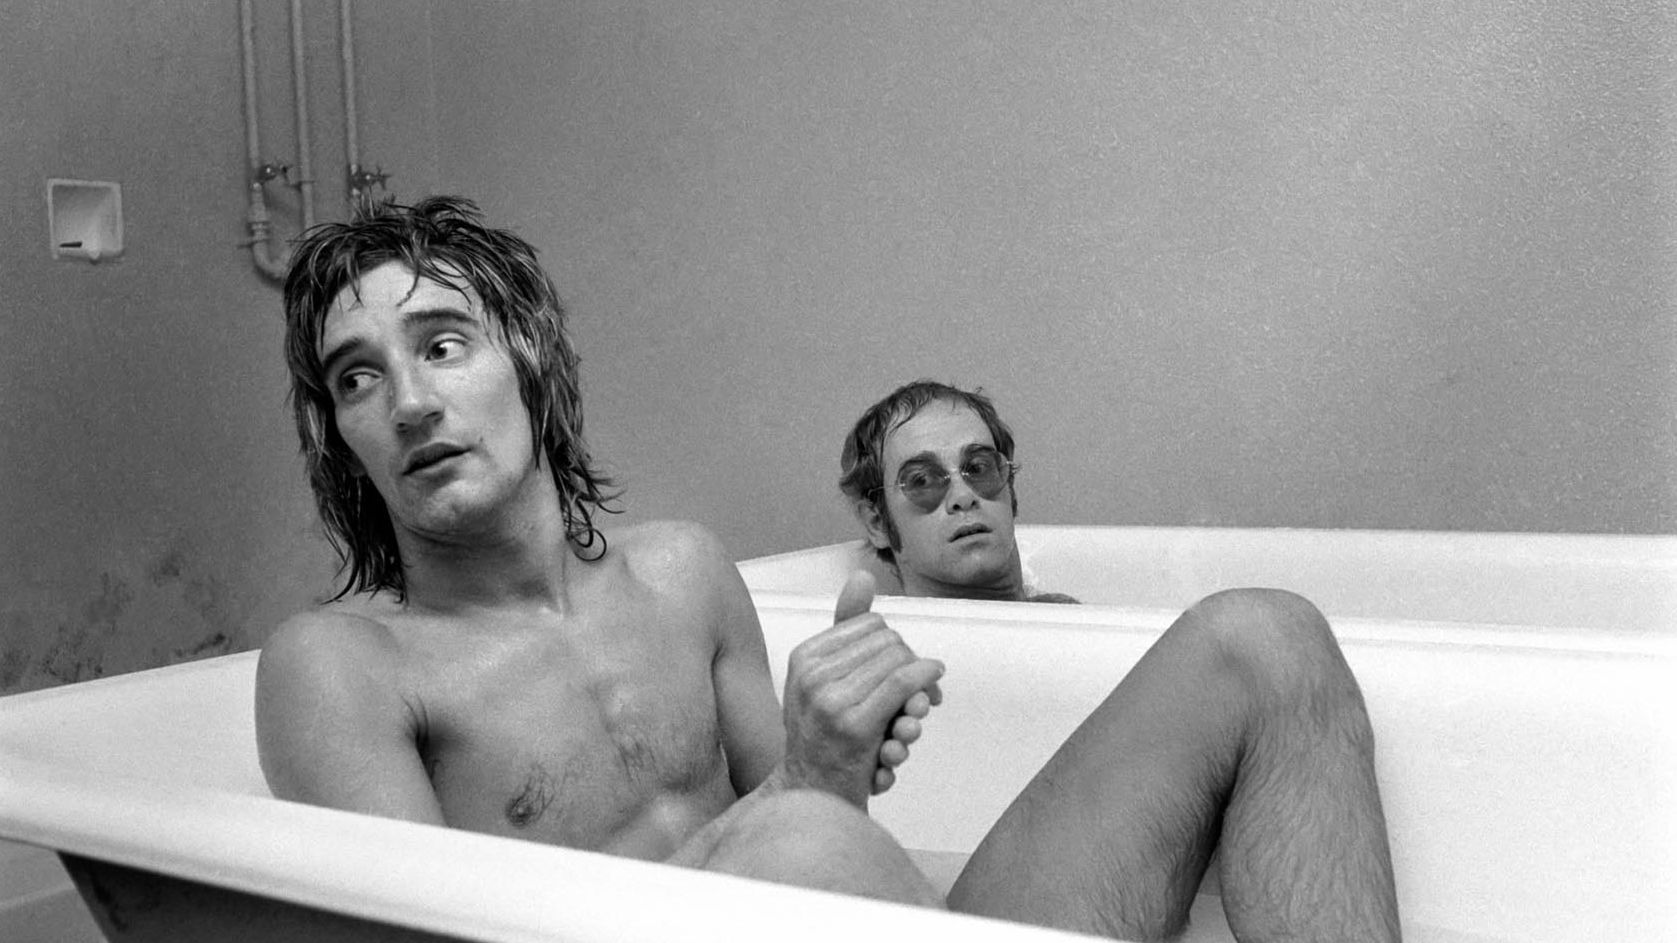 John and singer Rod Stewart have a bath at the stadium of Watford Football Club in 1973. John, a lifelong Watford fan, later owned the English soccer club. Today, one of the stadium's stands is named after him.